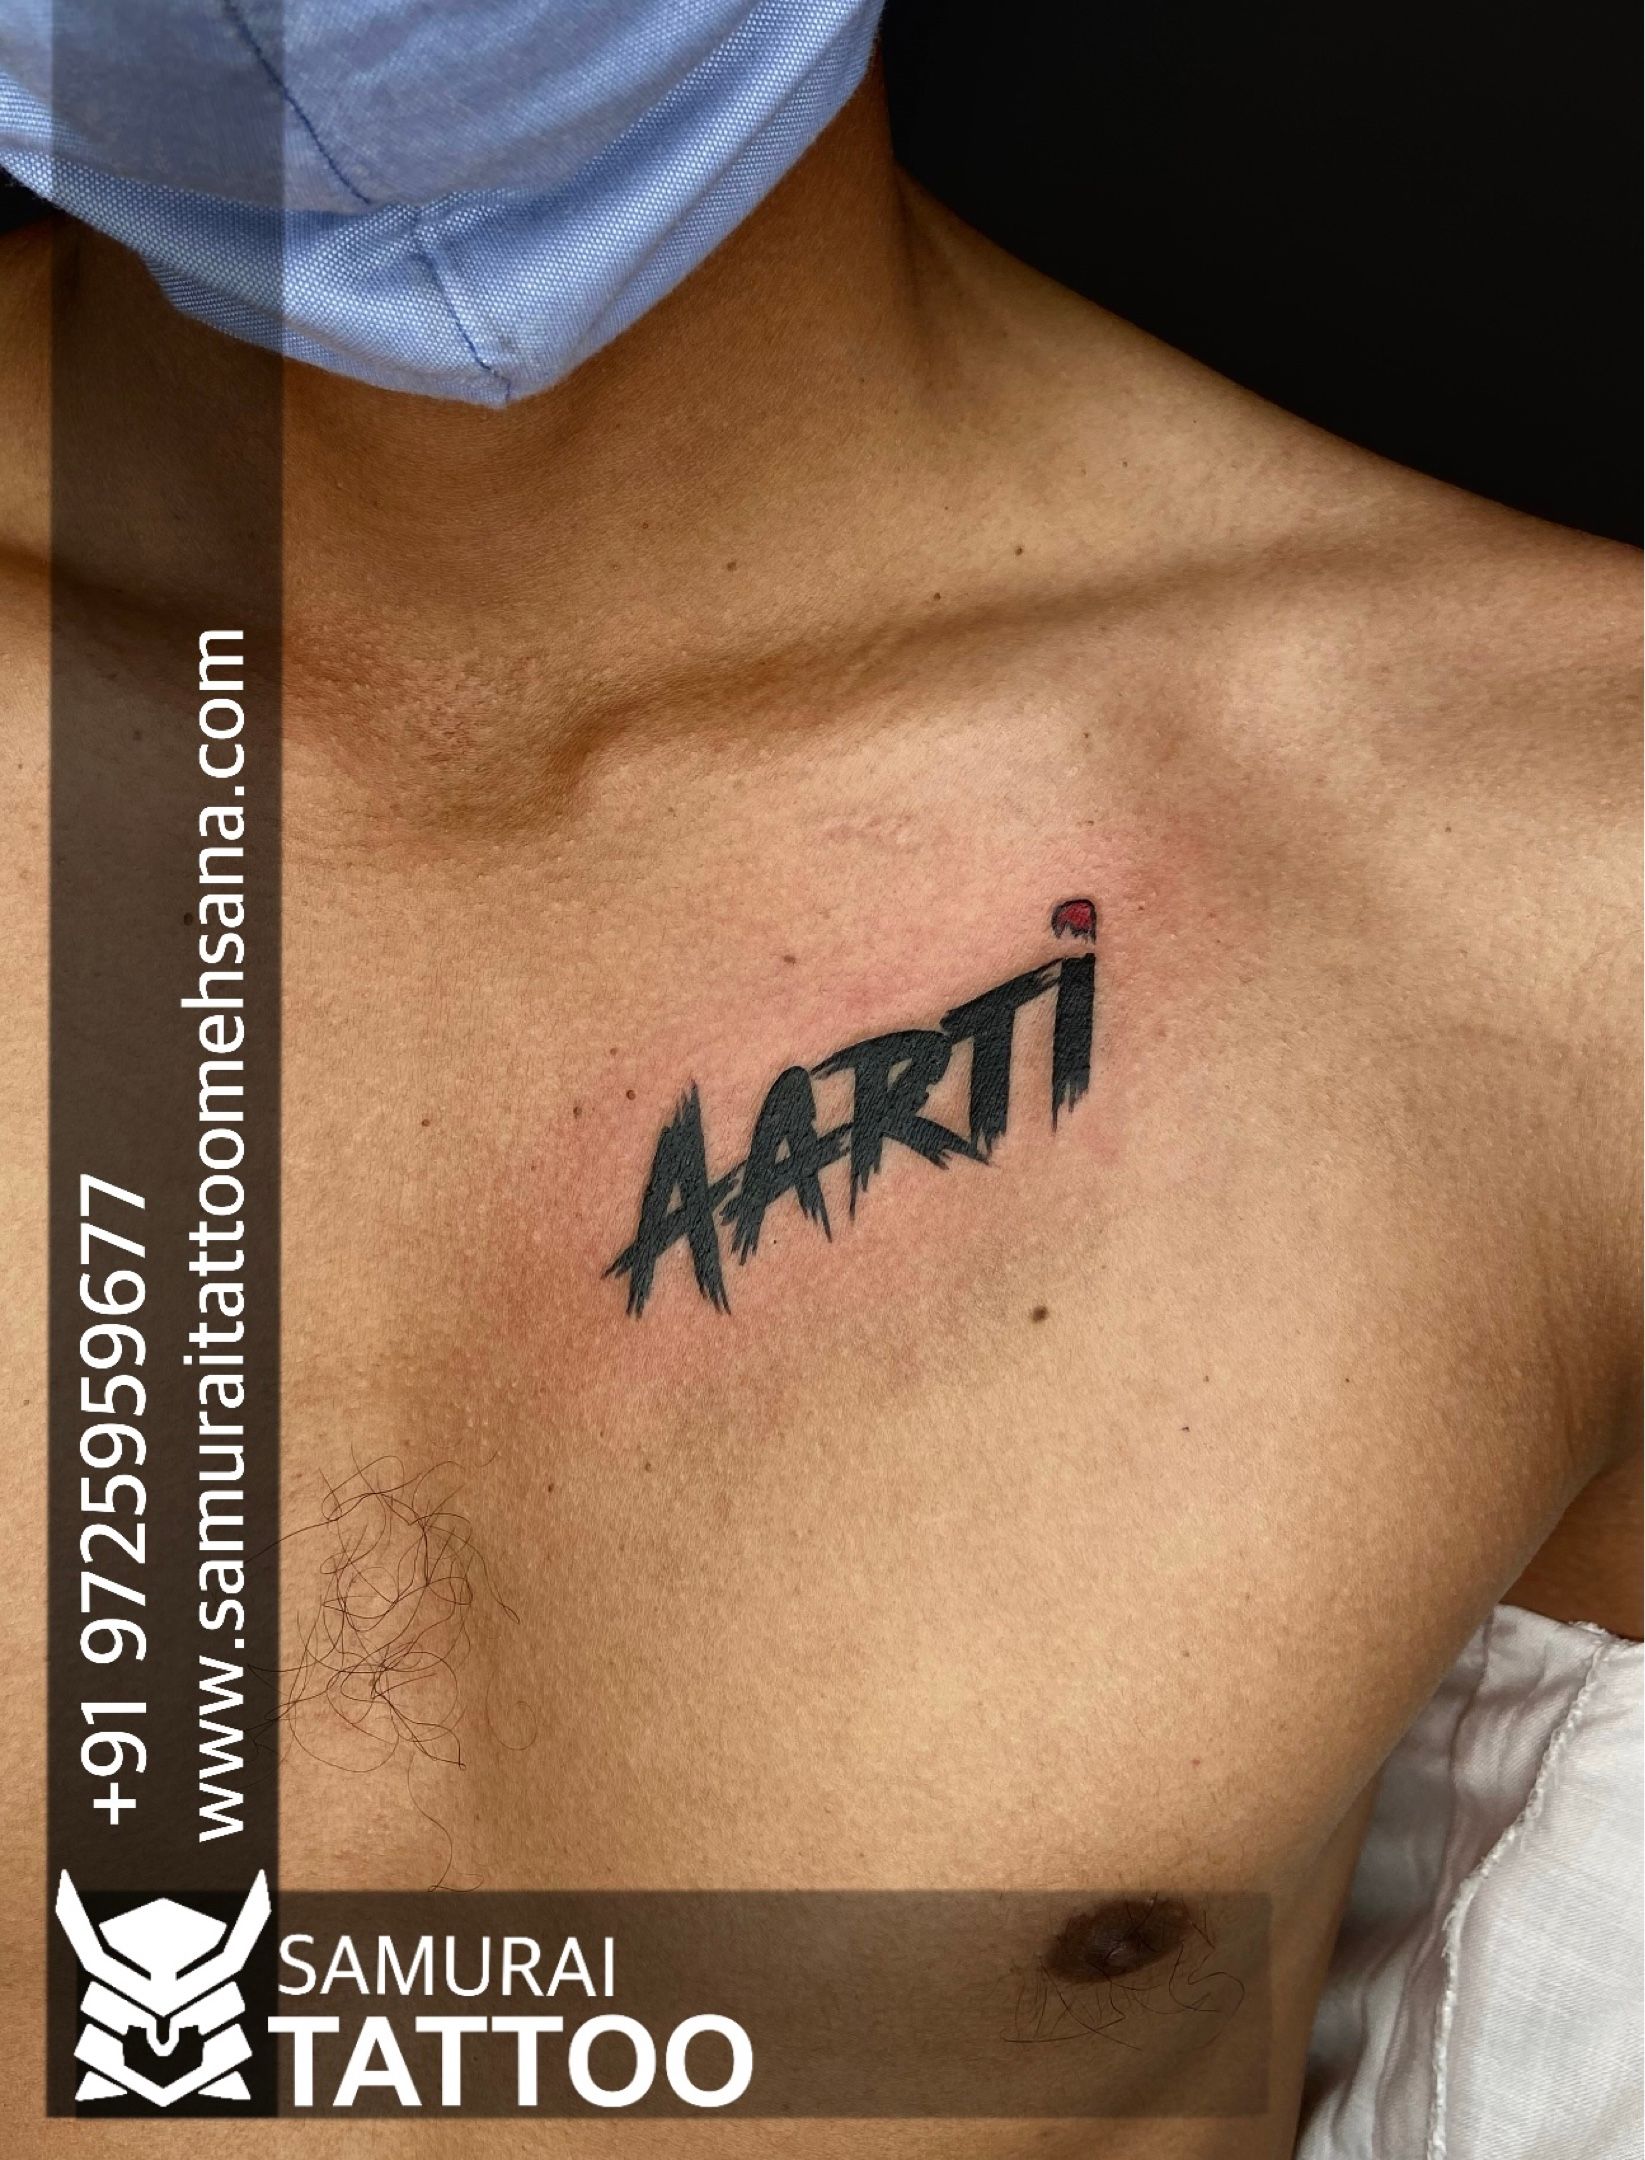 Tattoo uploaded by Vipul Chaudhary  Aarti name tattoo Aarti name tattoo  design Aarti name  Tattoodo